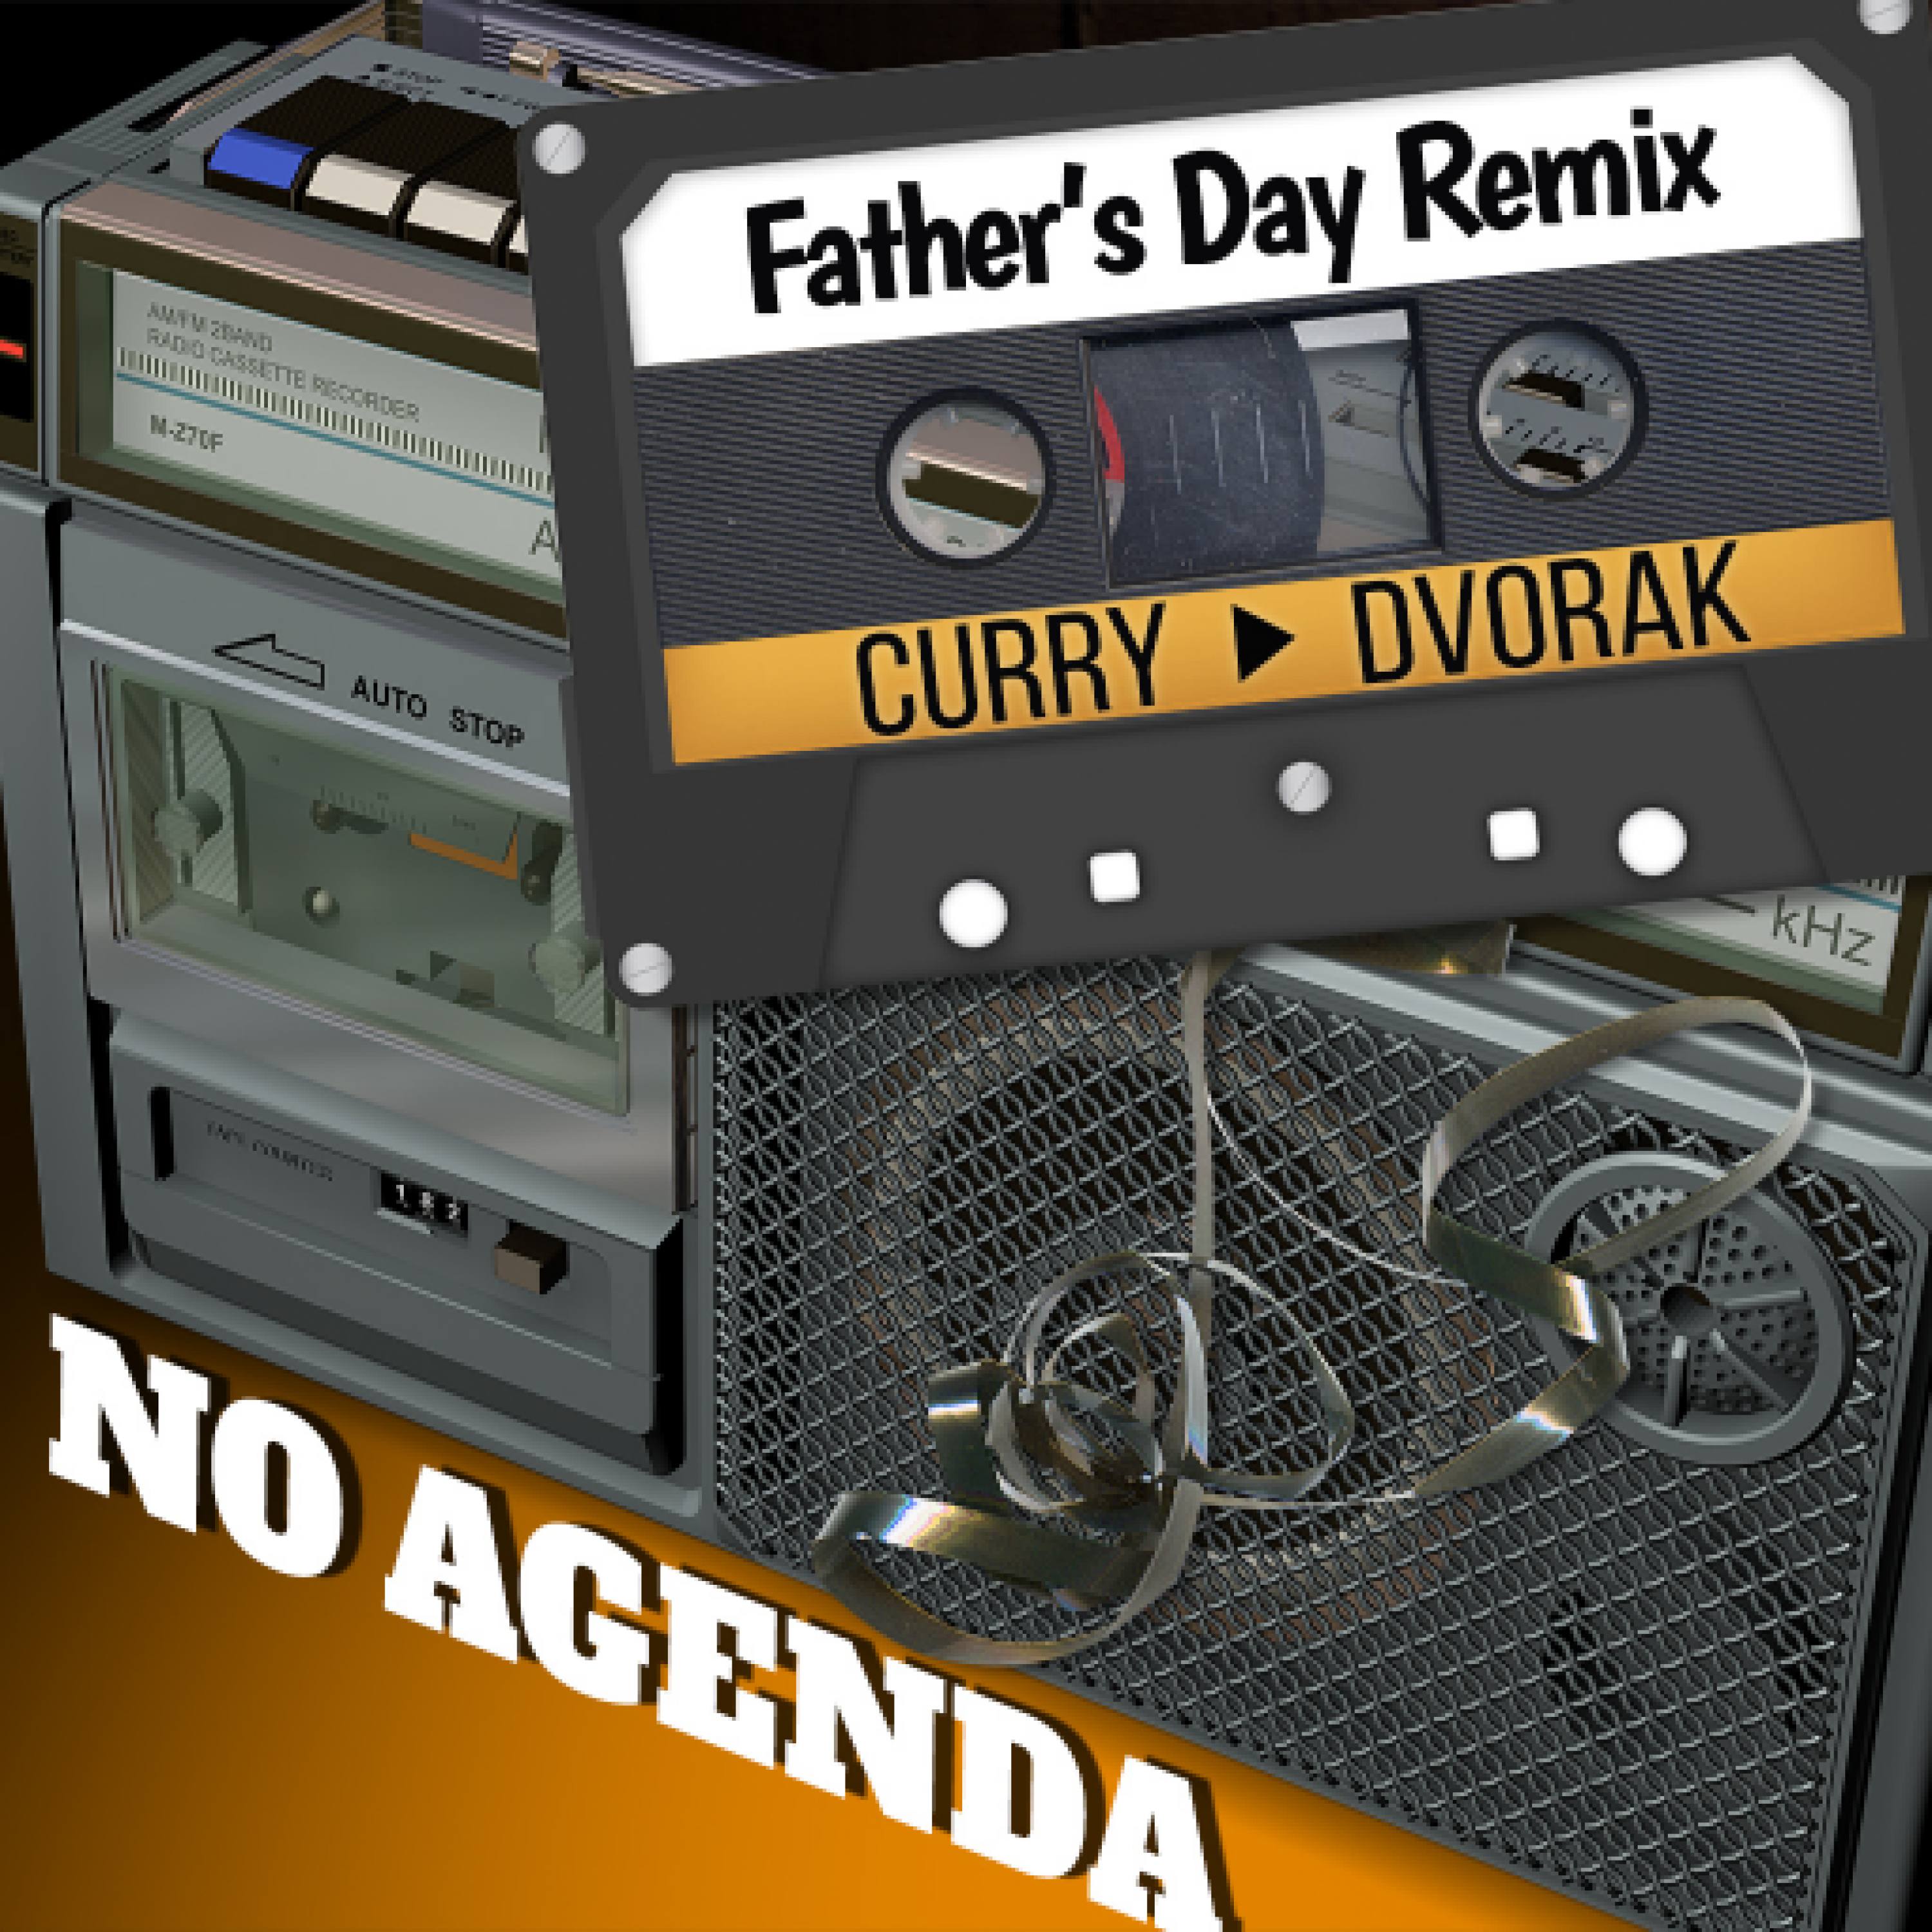 Father's Day Remix by nessworks for 